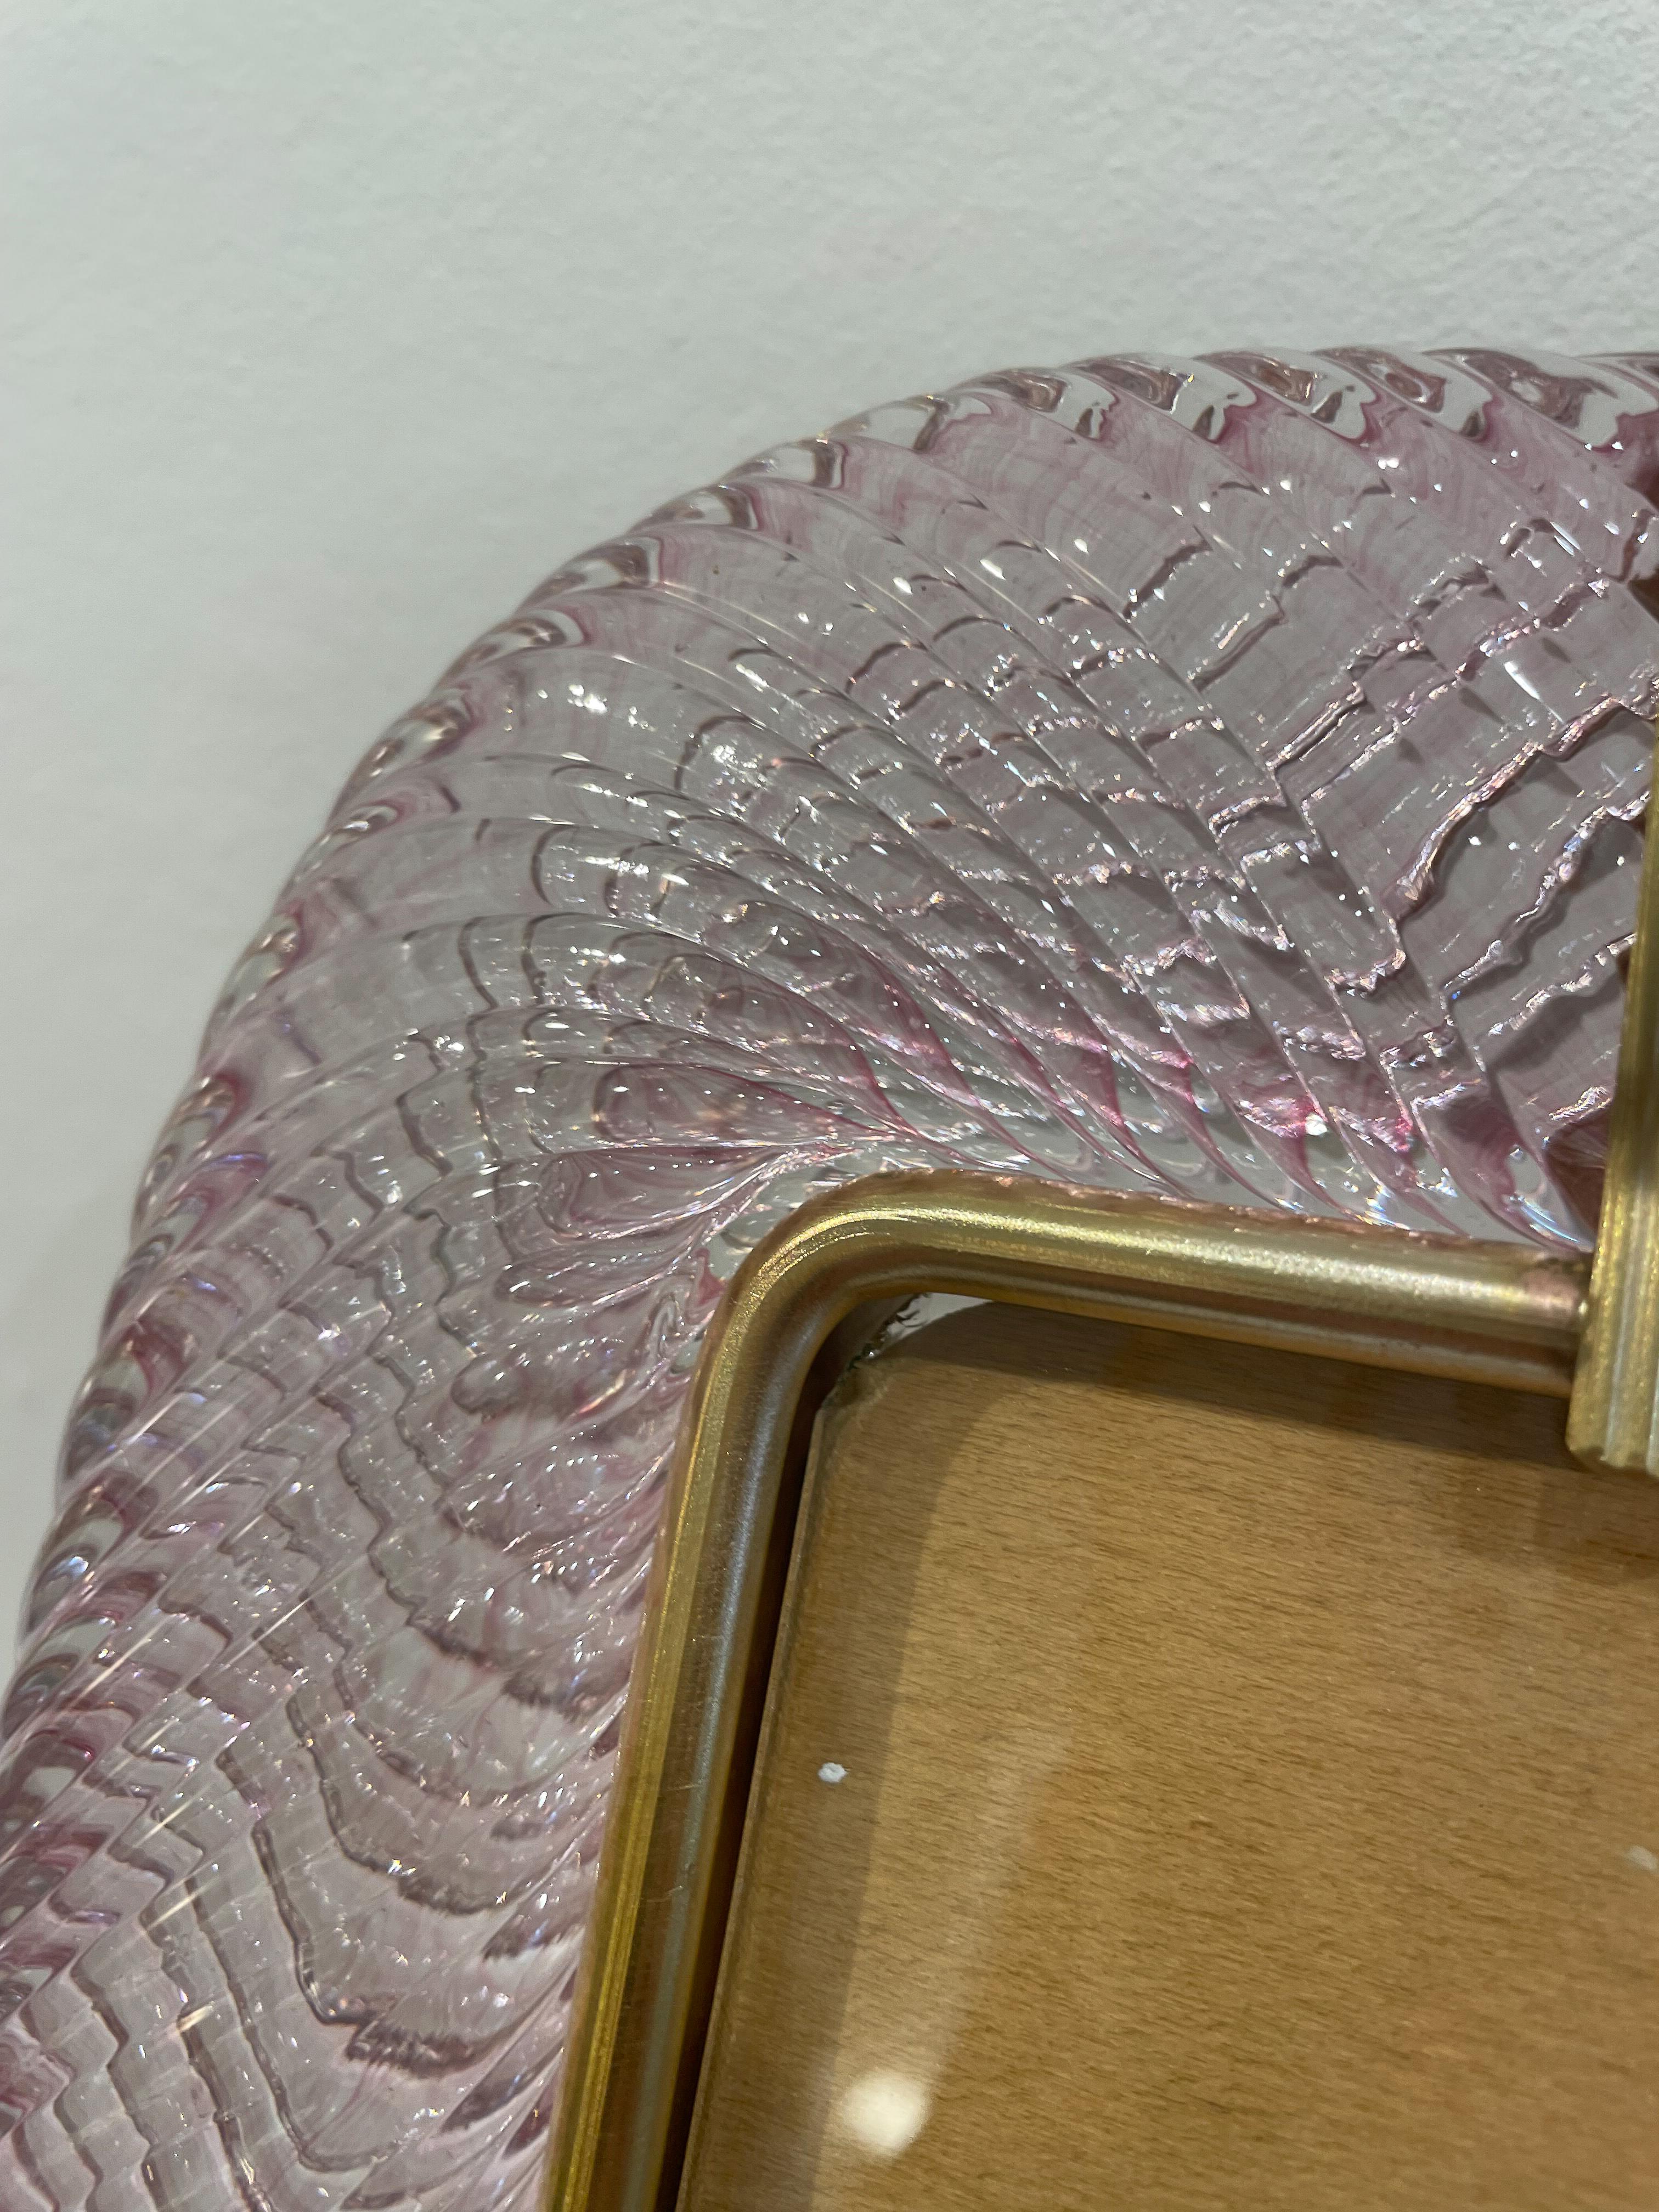 Barovier & Toso pink murano glass and brass picture frame, 2000s.